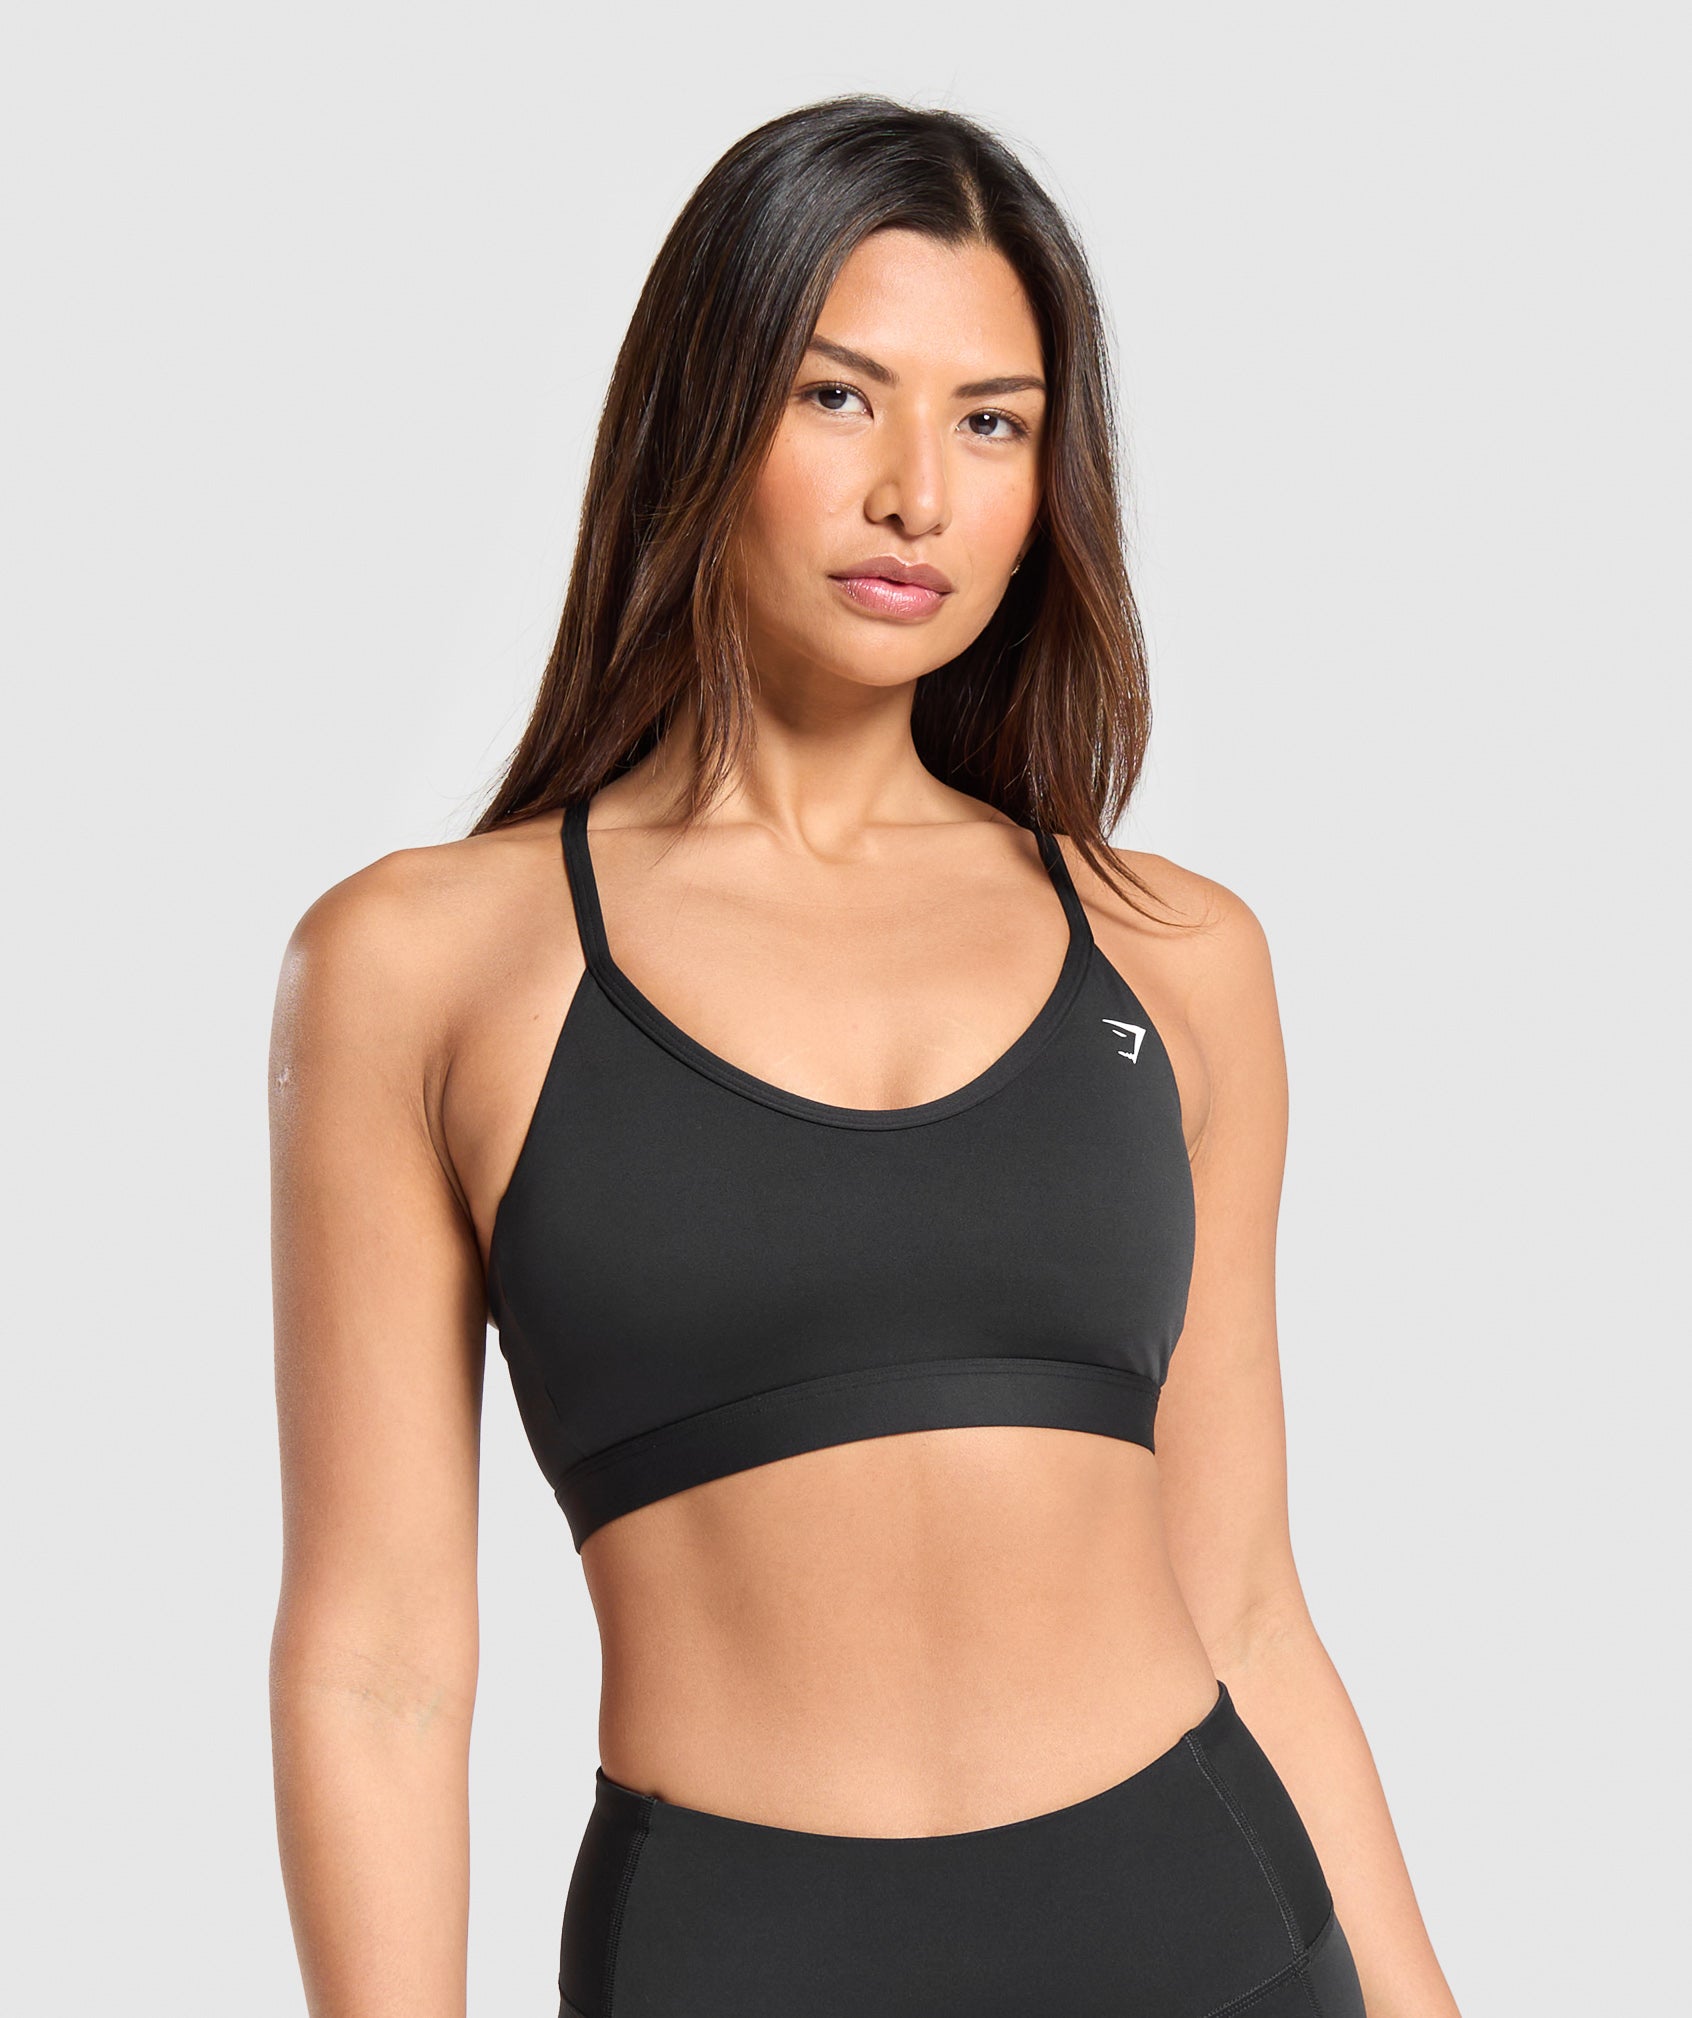 V Neck Sports Bra in Black is out of stock